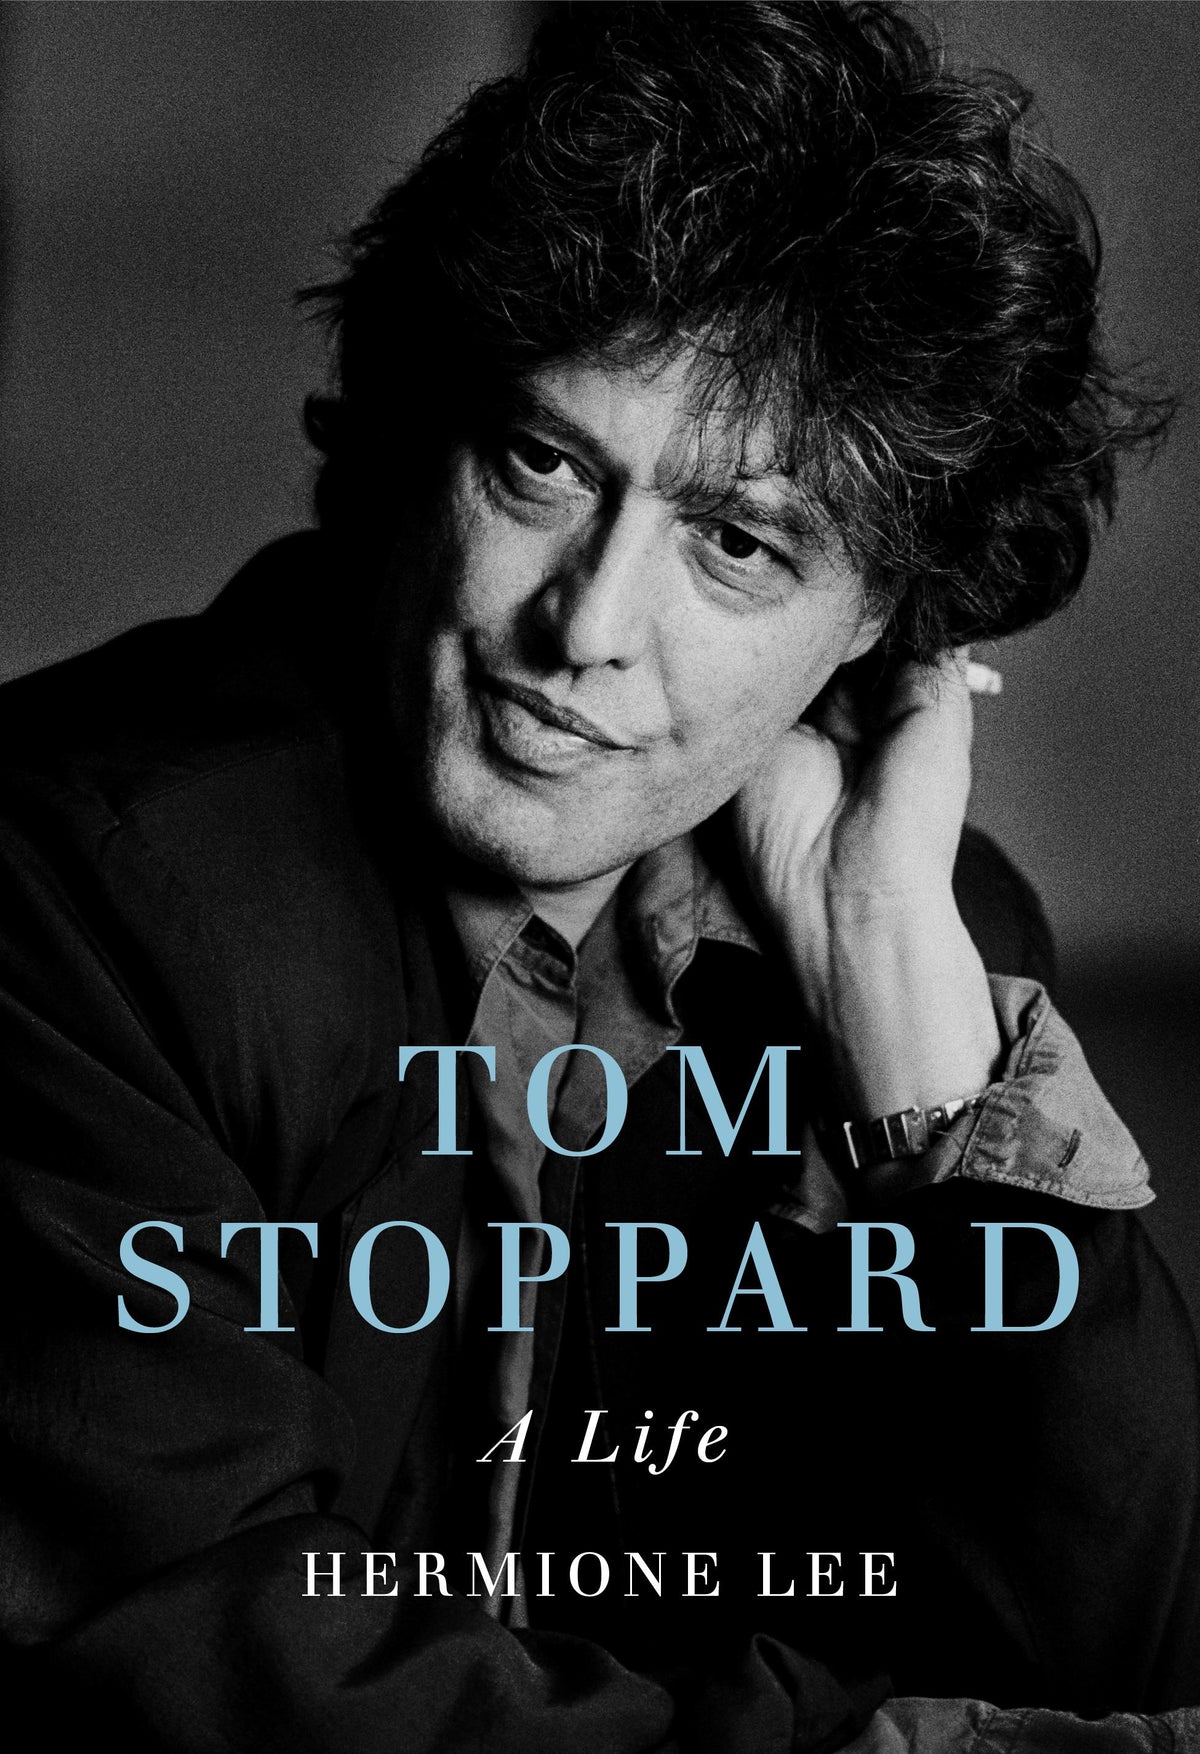 Tom Stoppard: A Life